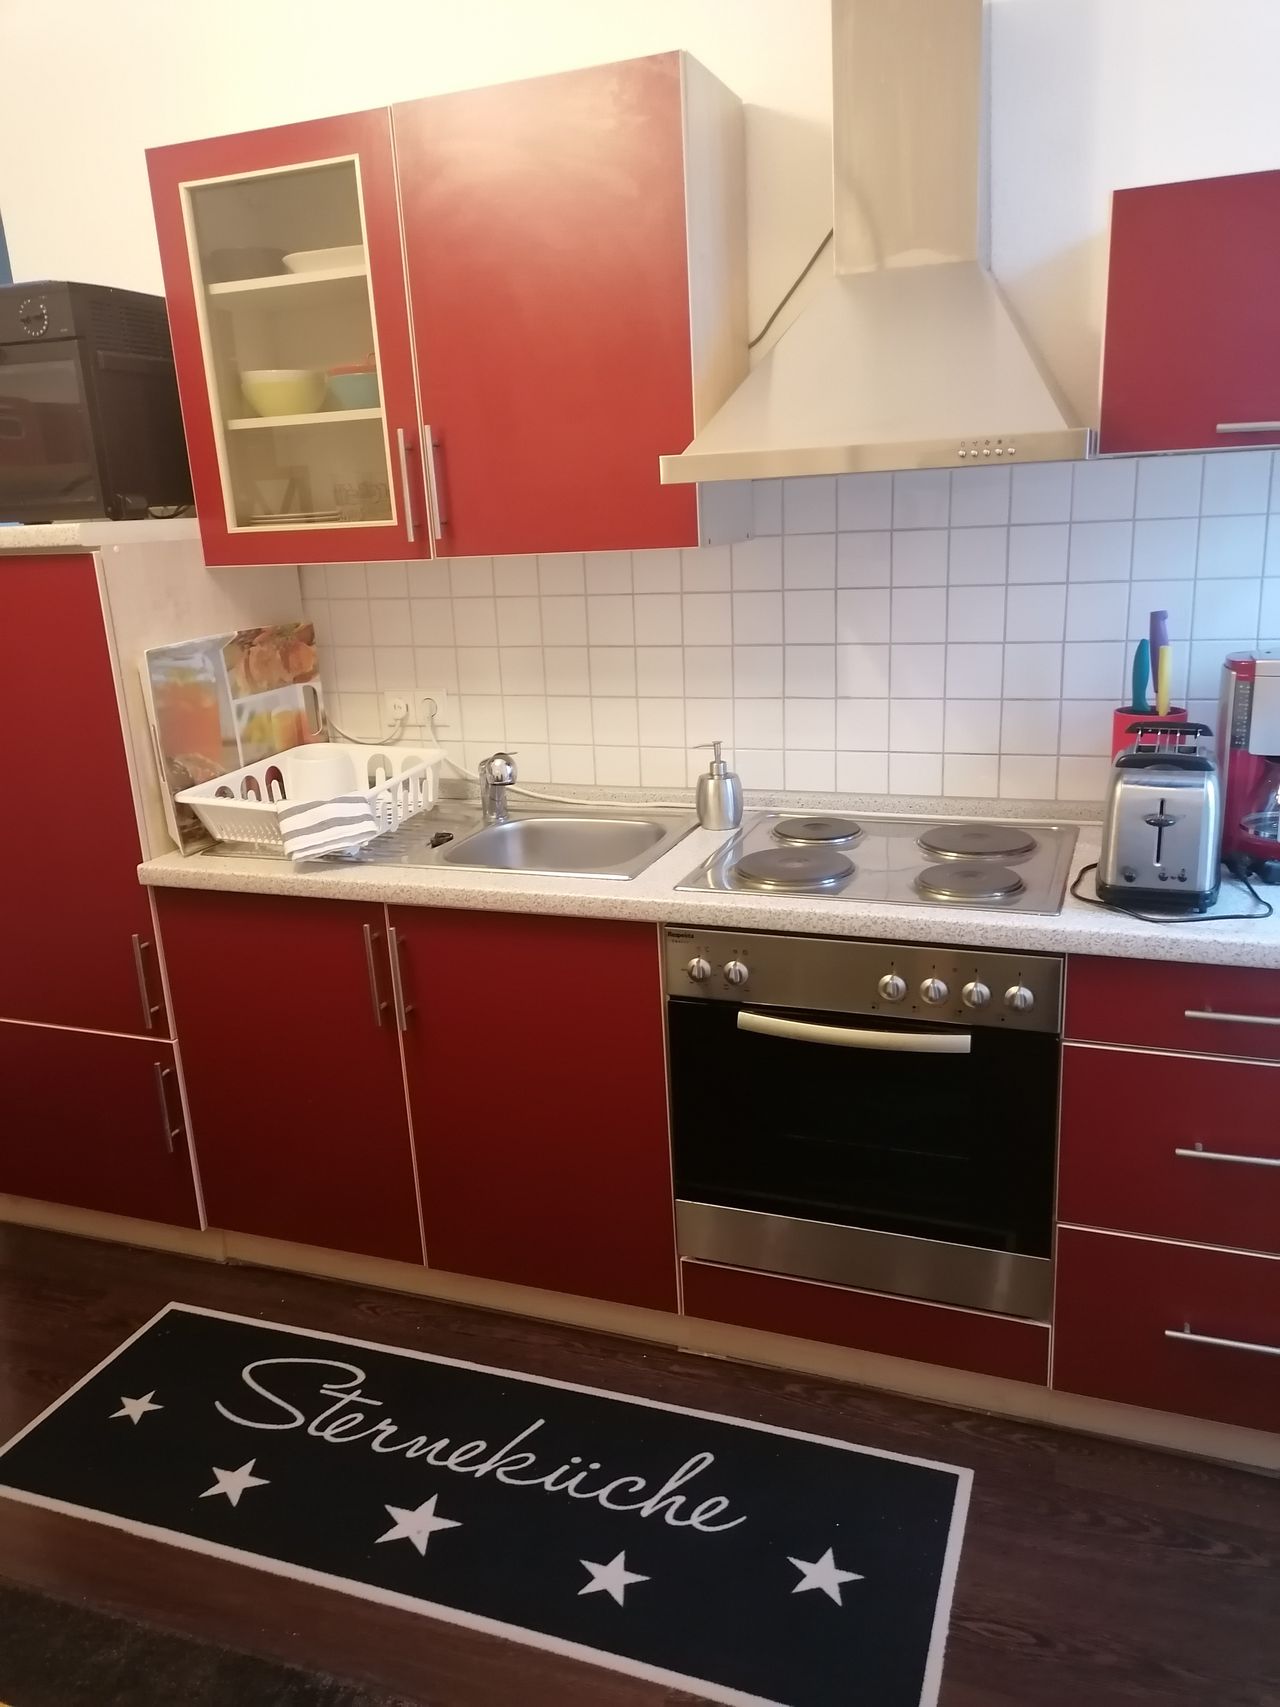 Furnished apartment in an old building in a very good location close to the city, Bürgerpark and university